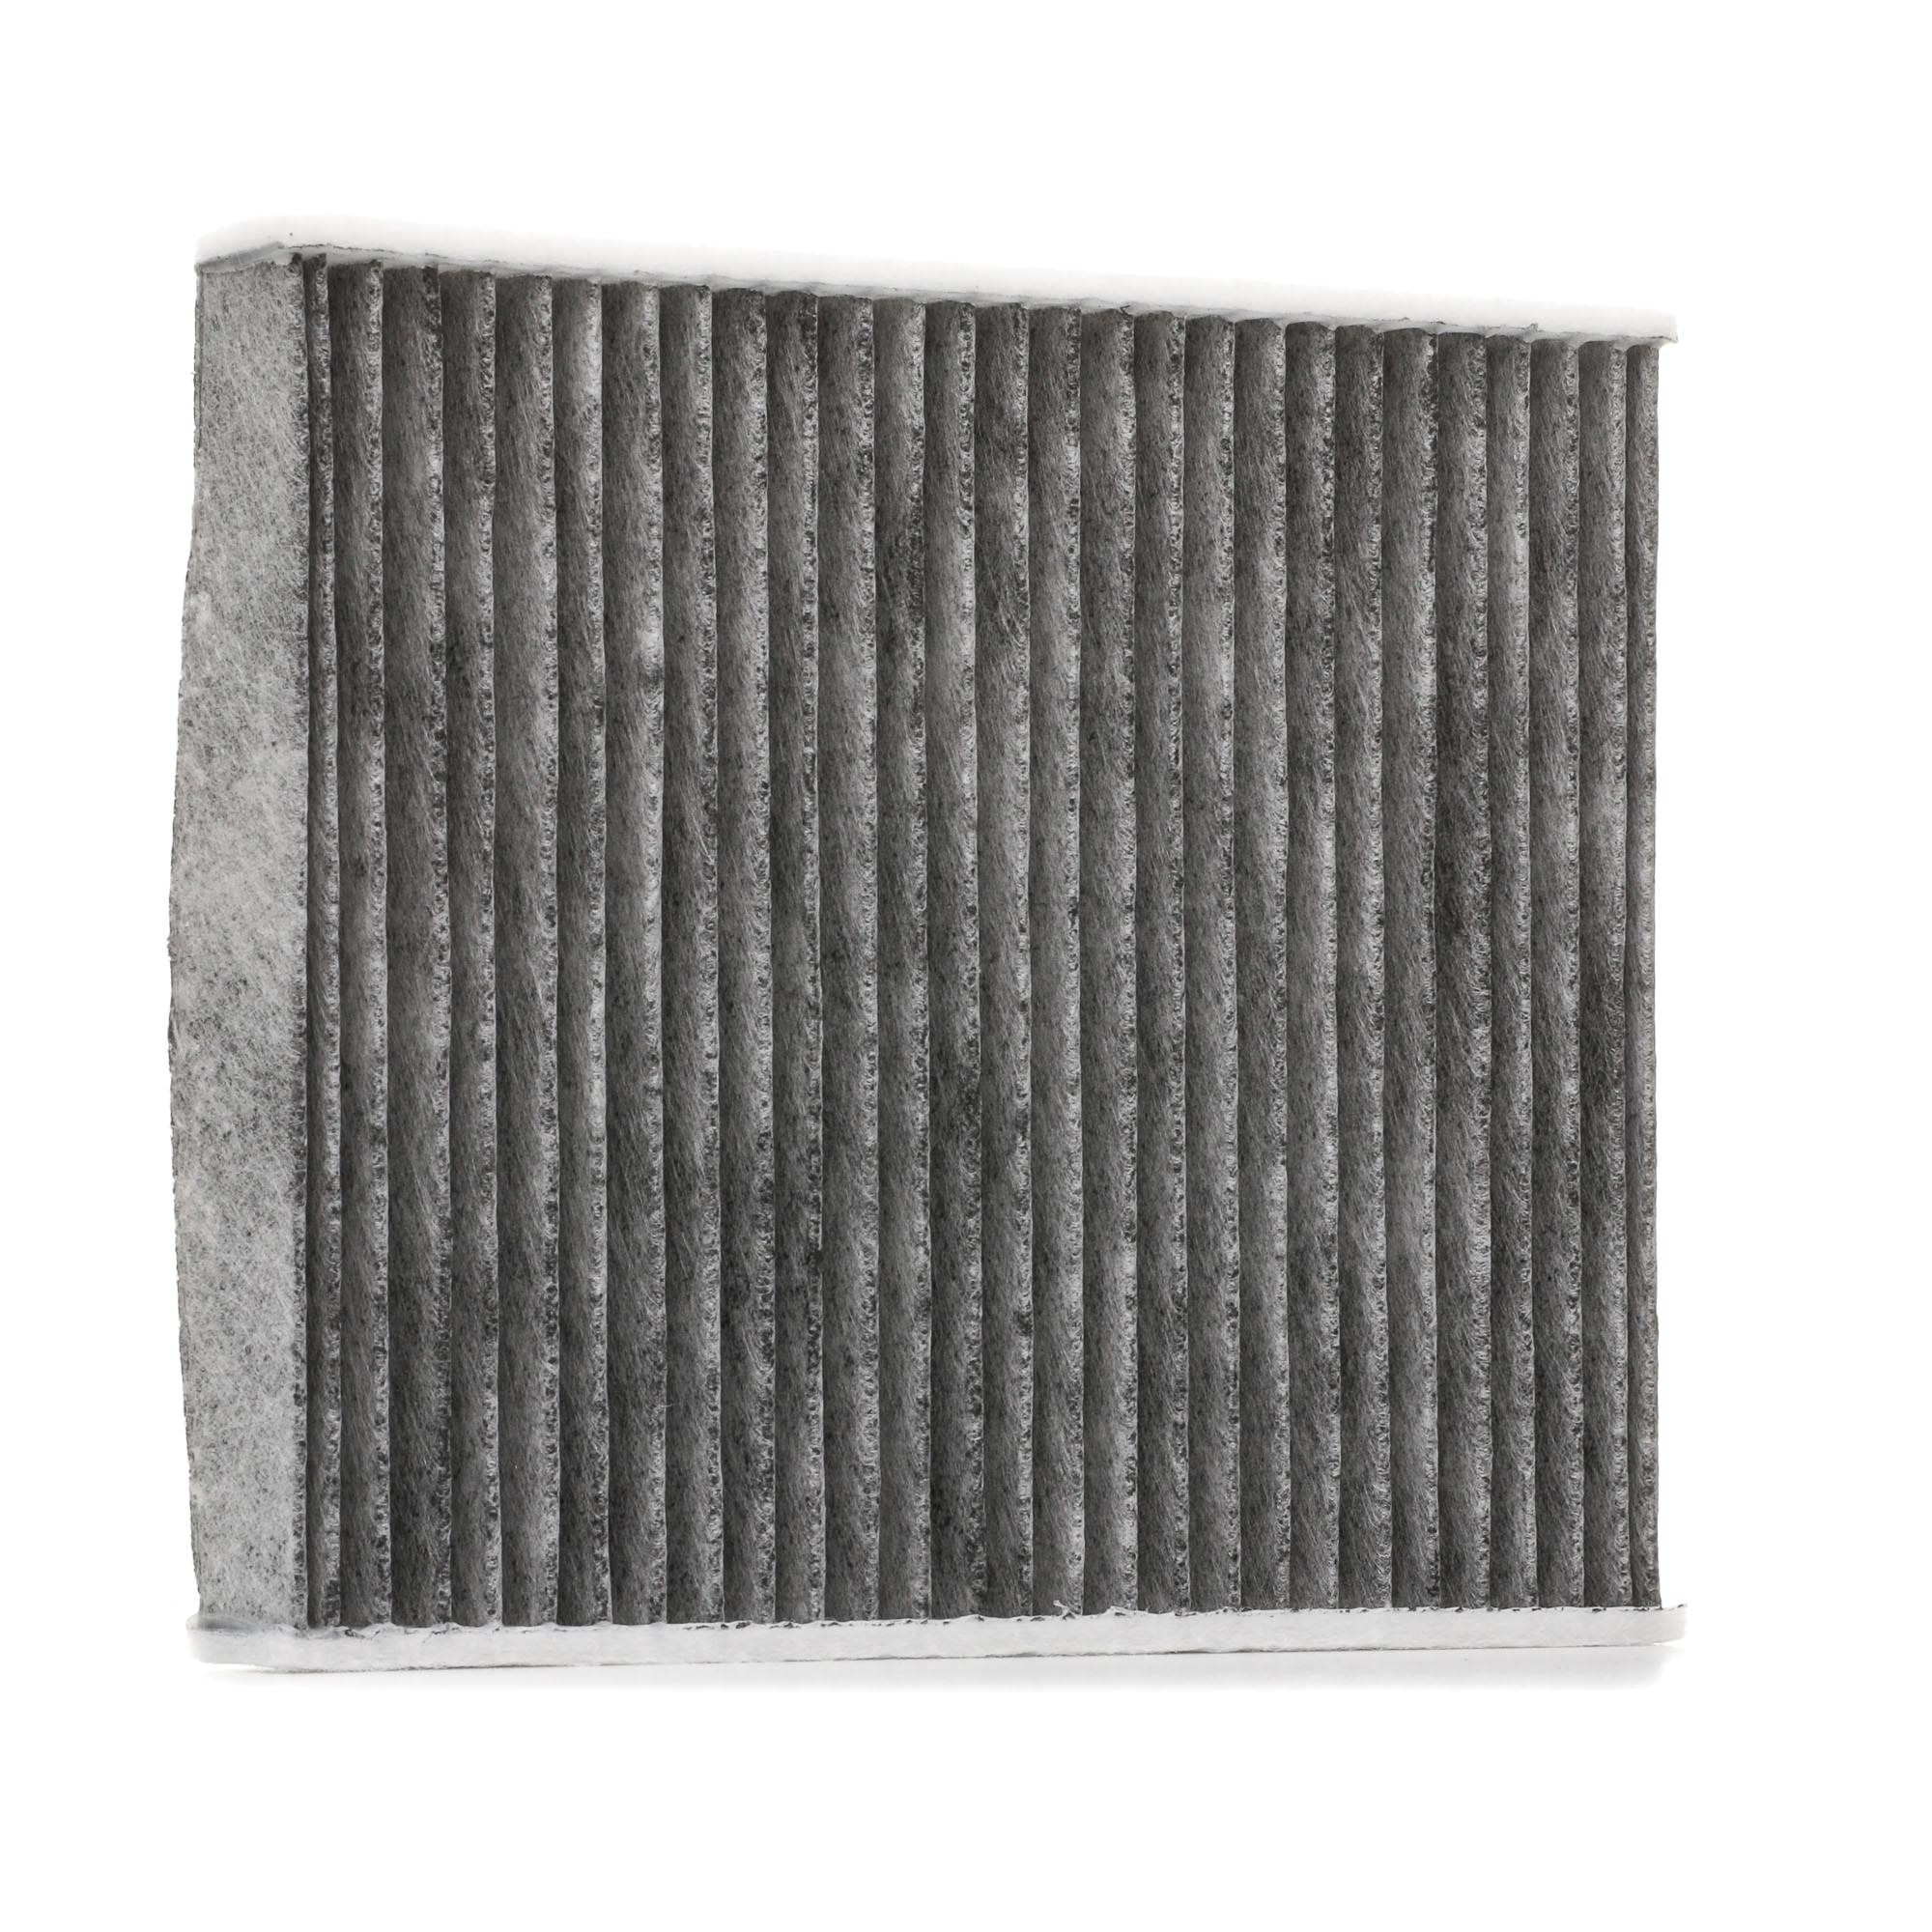 STARK Activated Carbon Filter, 215 mm x 185 mm x 29 mm Width: 185mm, Height: 29mm, Length: 215mm Cabin filter SKIF-0170467 buy